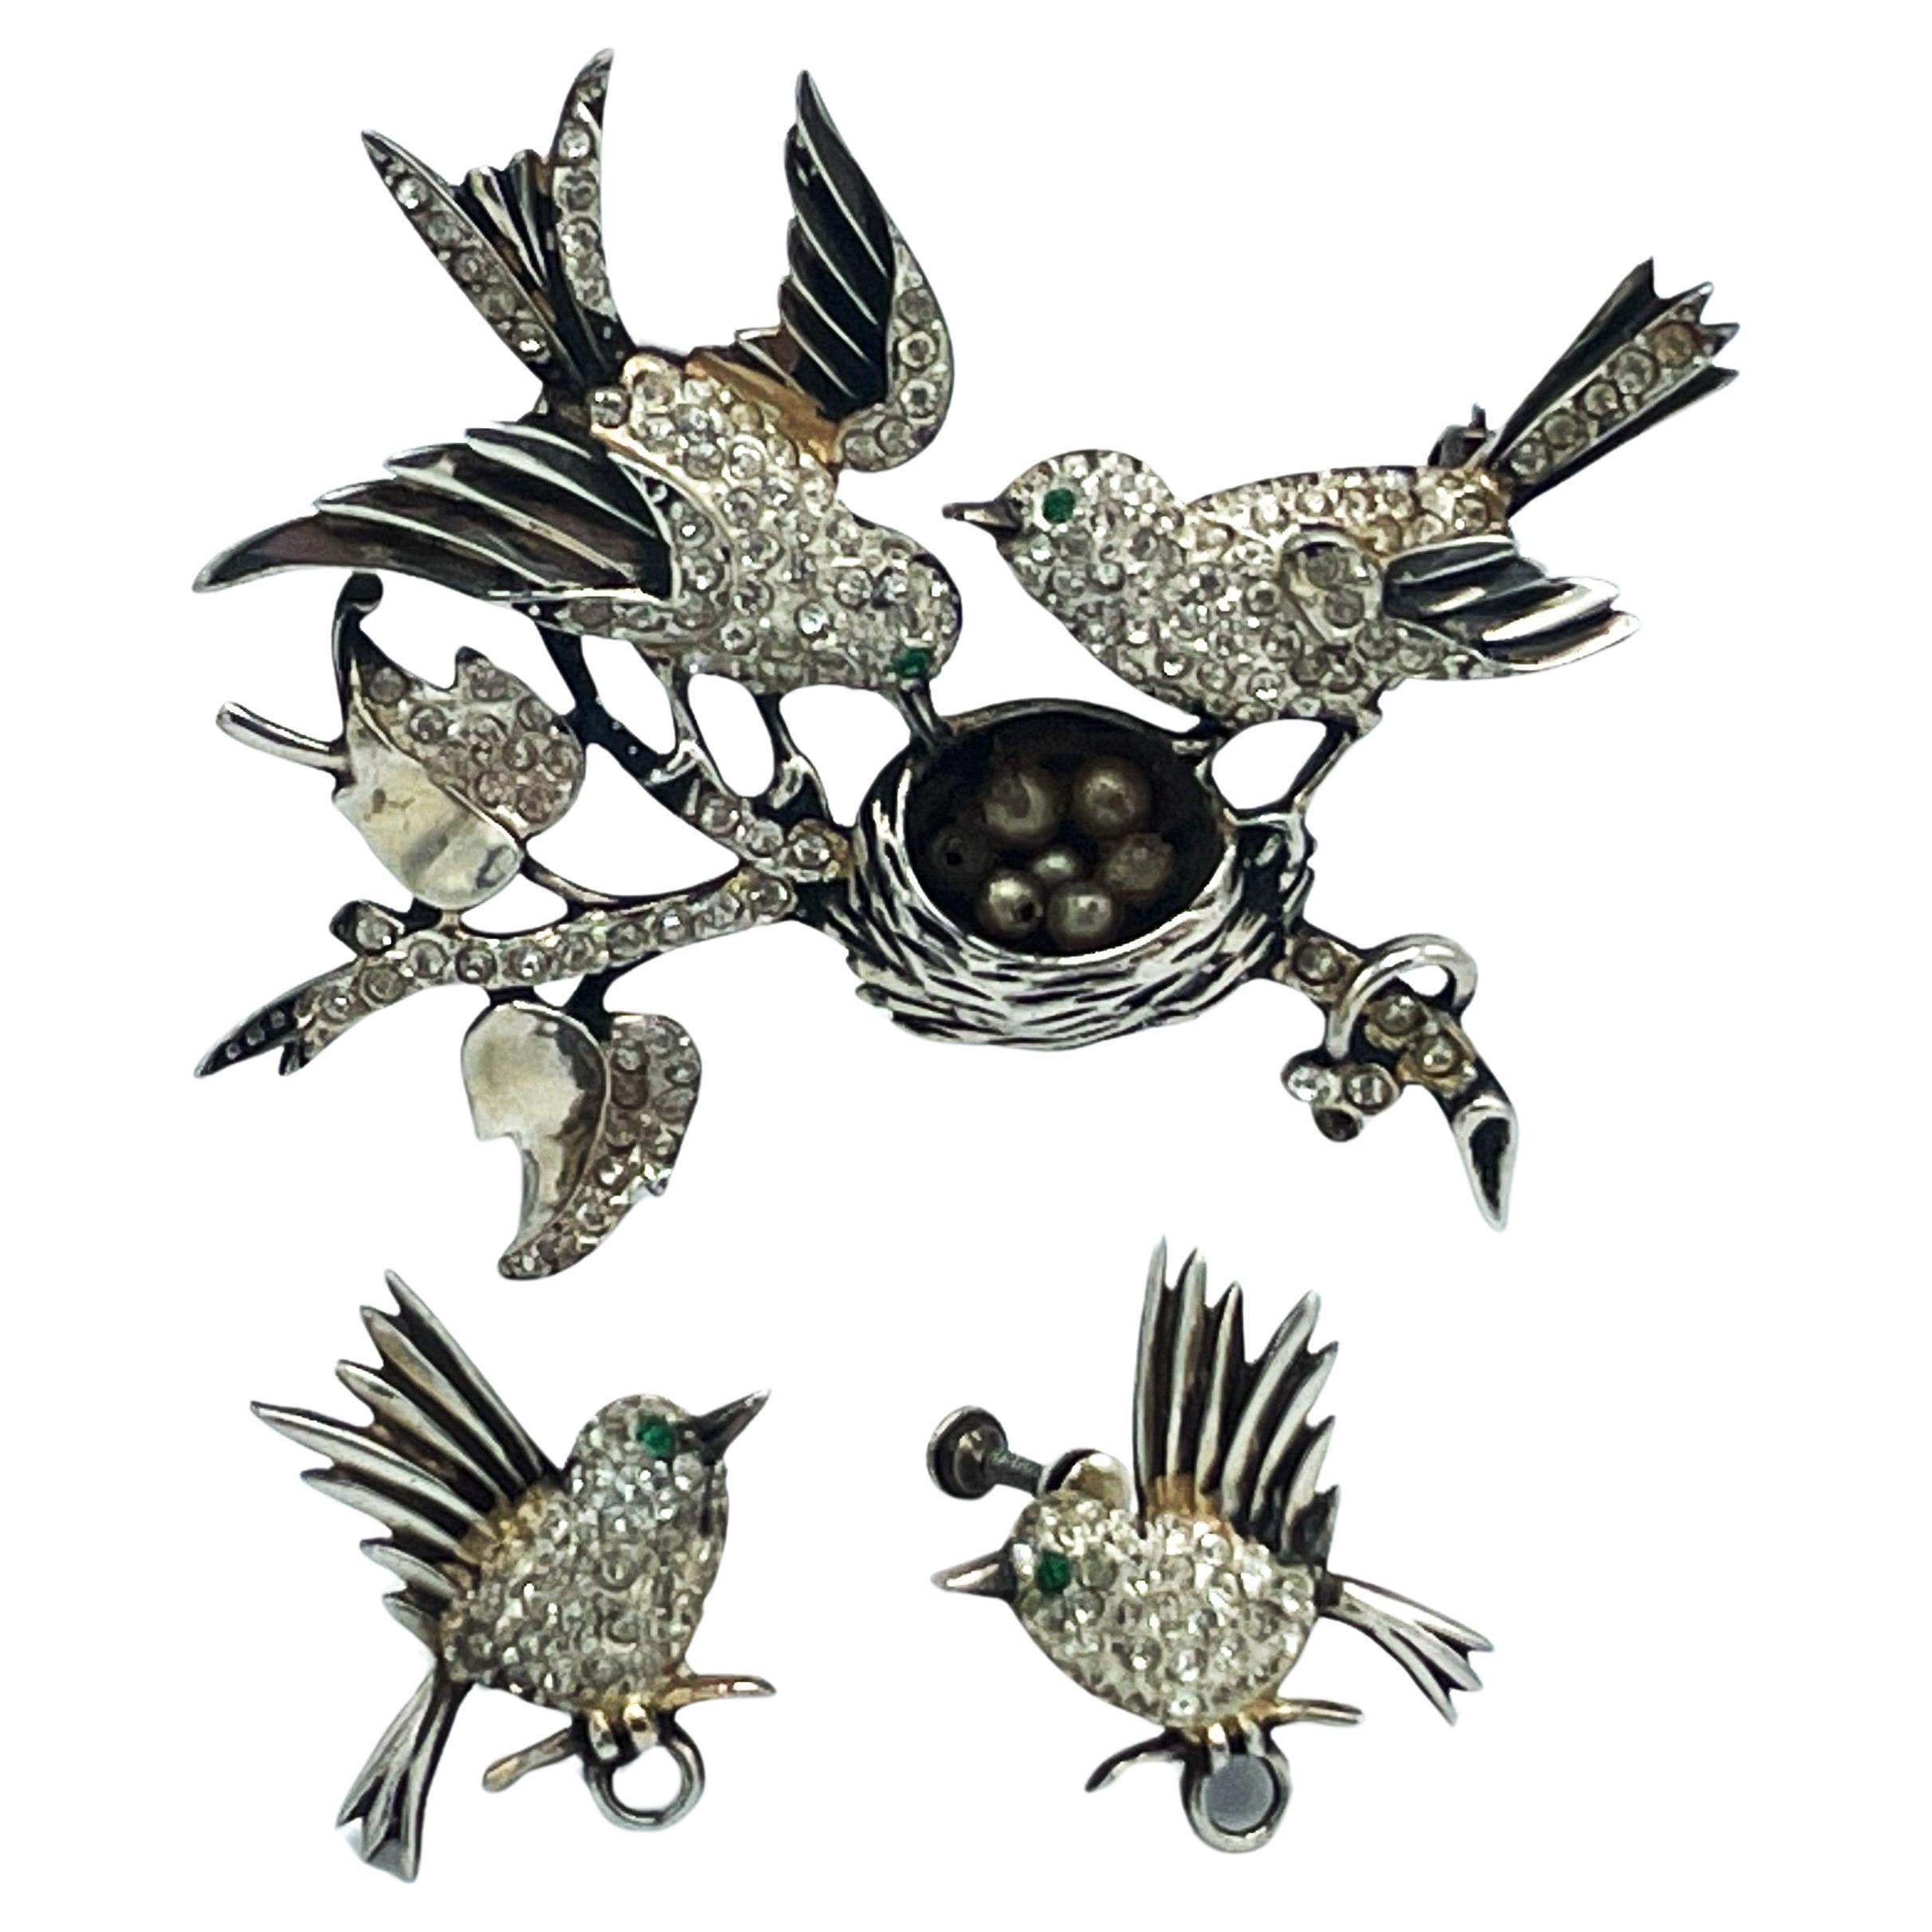 Lovebird brooch with matching bird earrings by SCHRAGER NY, Sterling, 1940s